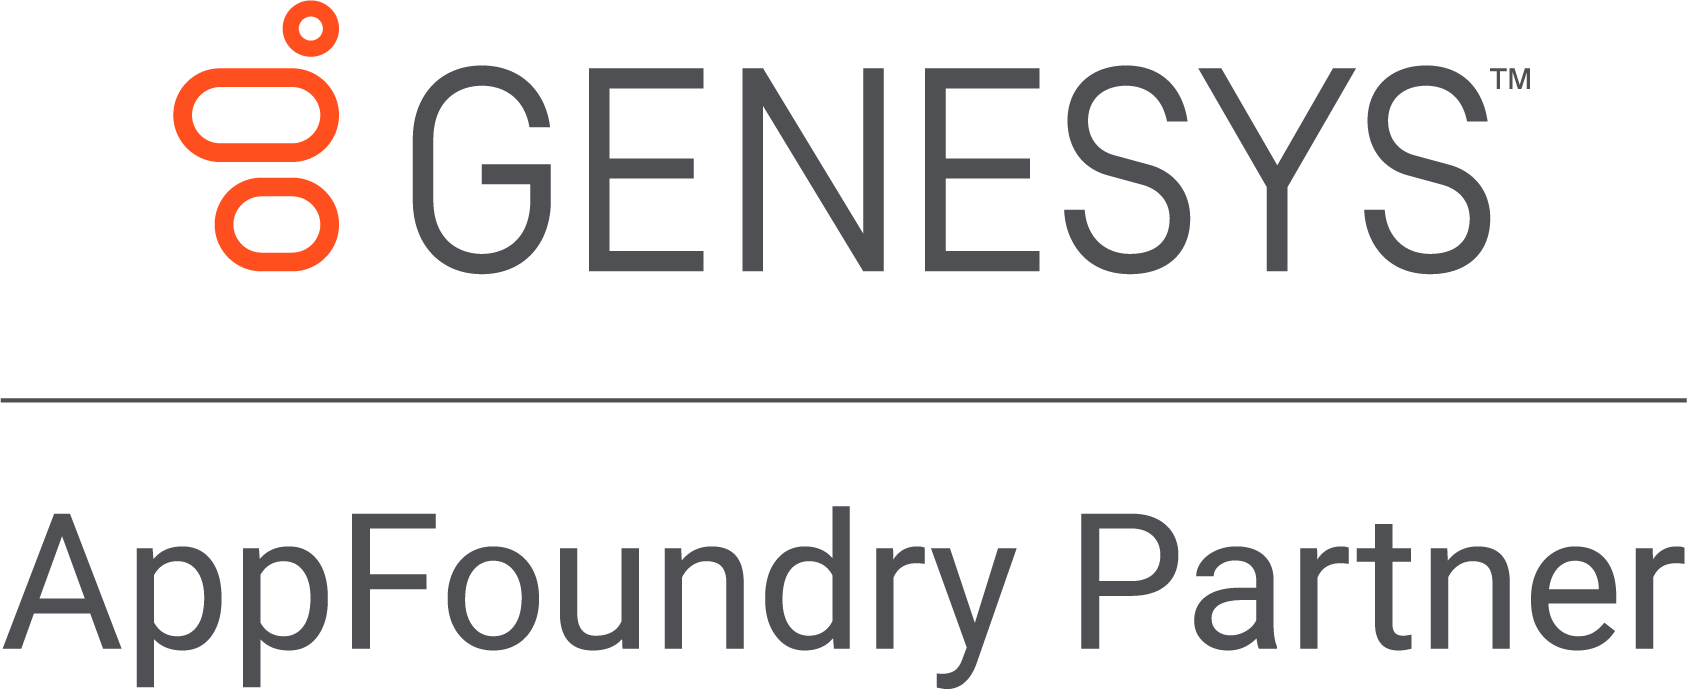 Genesys-AppFoundry Partner-Color